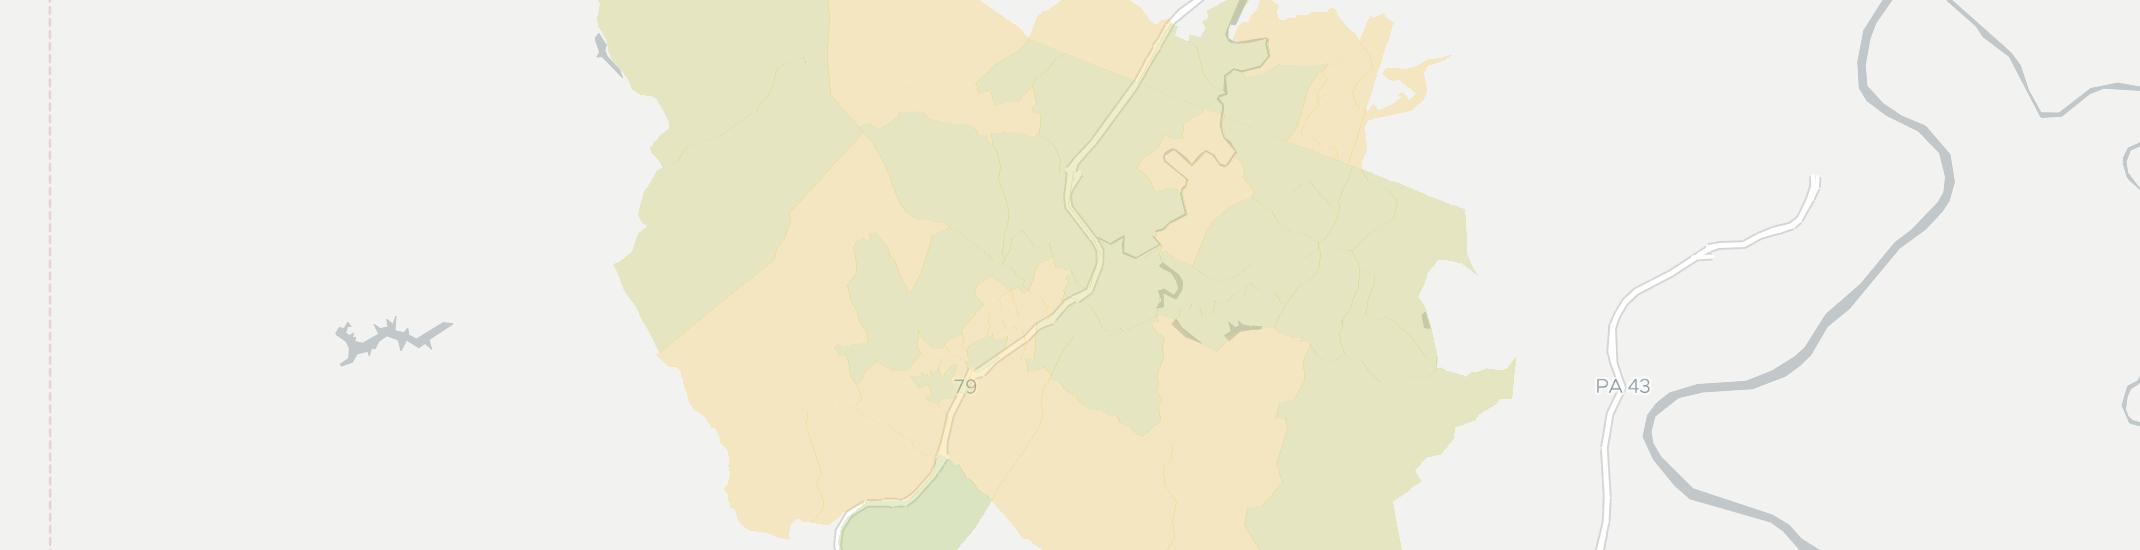 Canonsburg Internet Competition Map. Click for interactive map